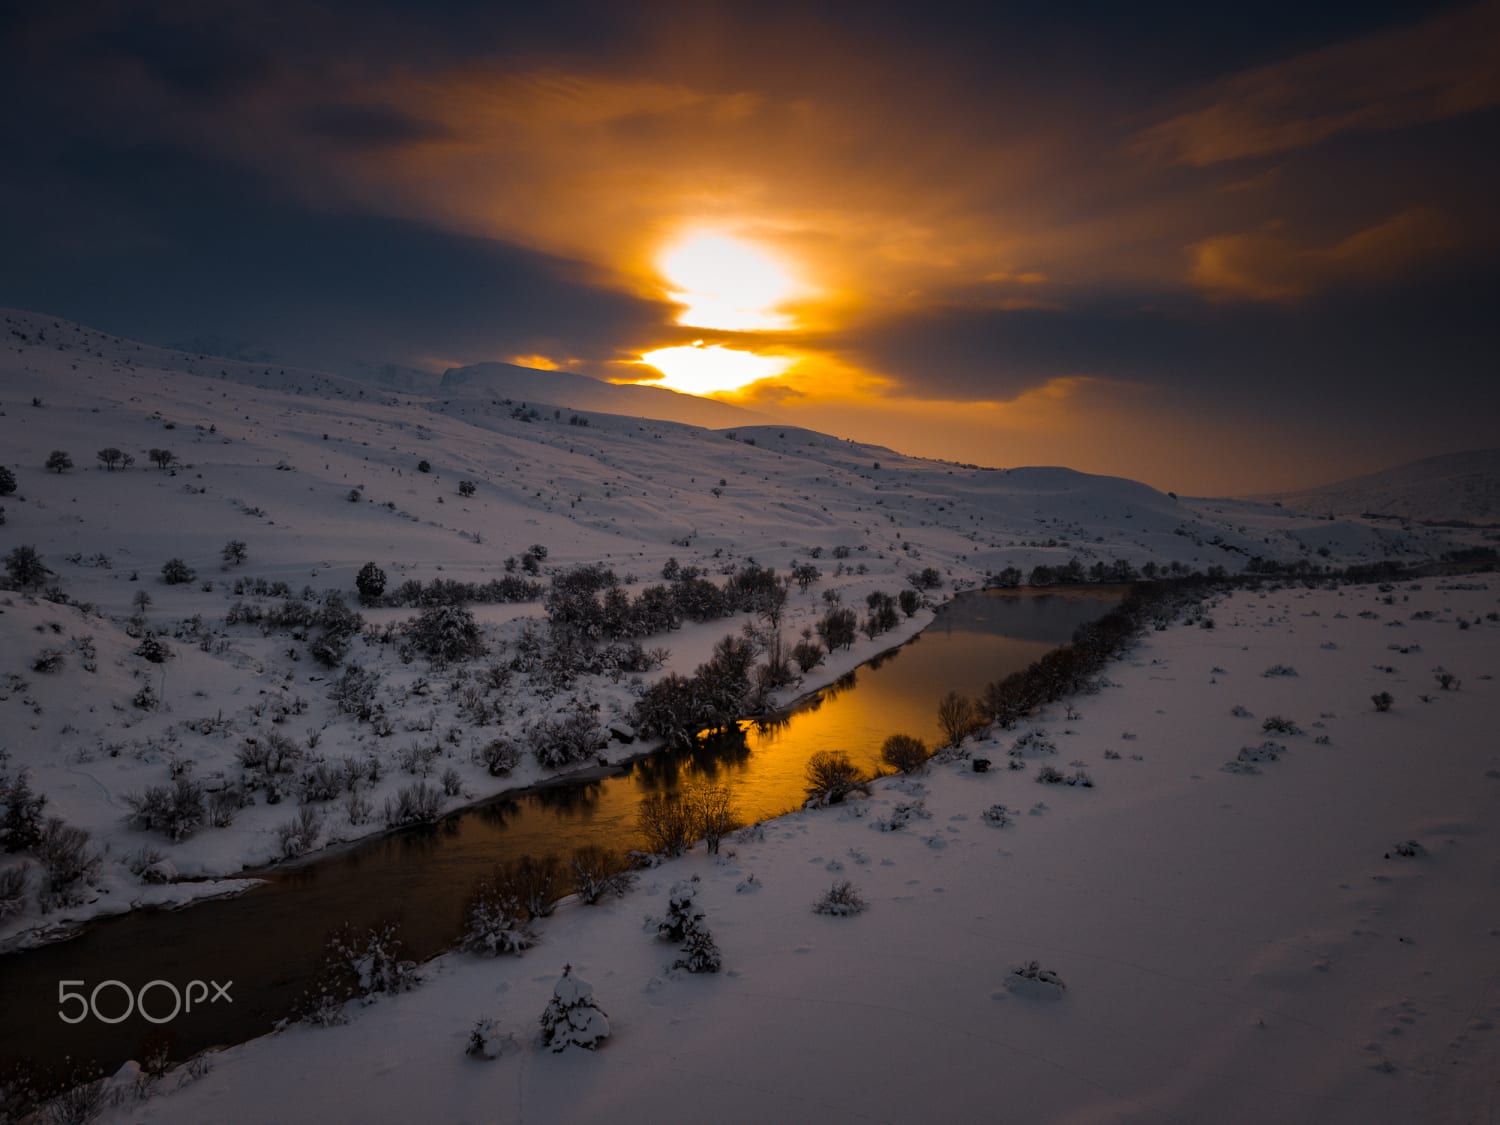 River view in winter